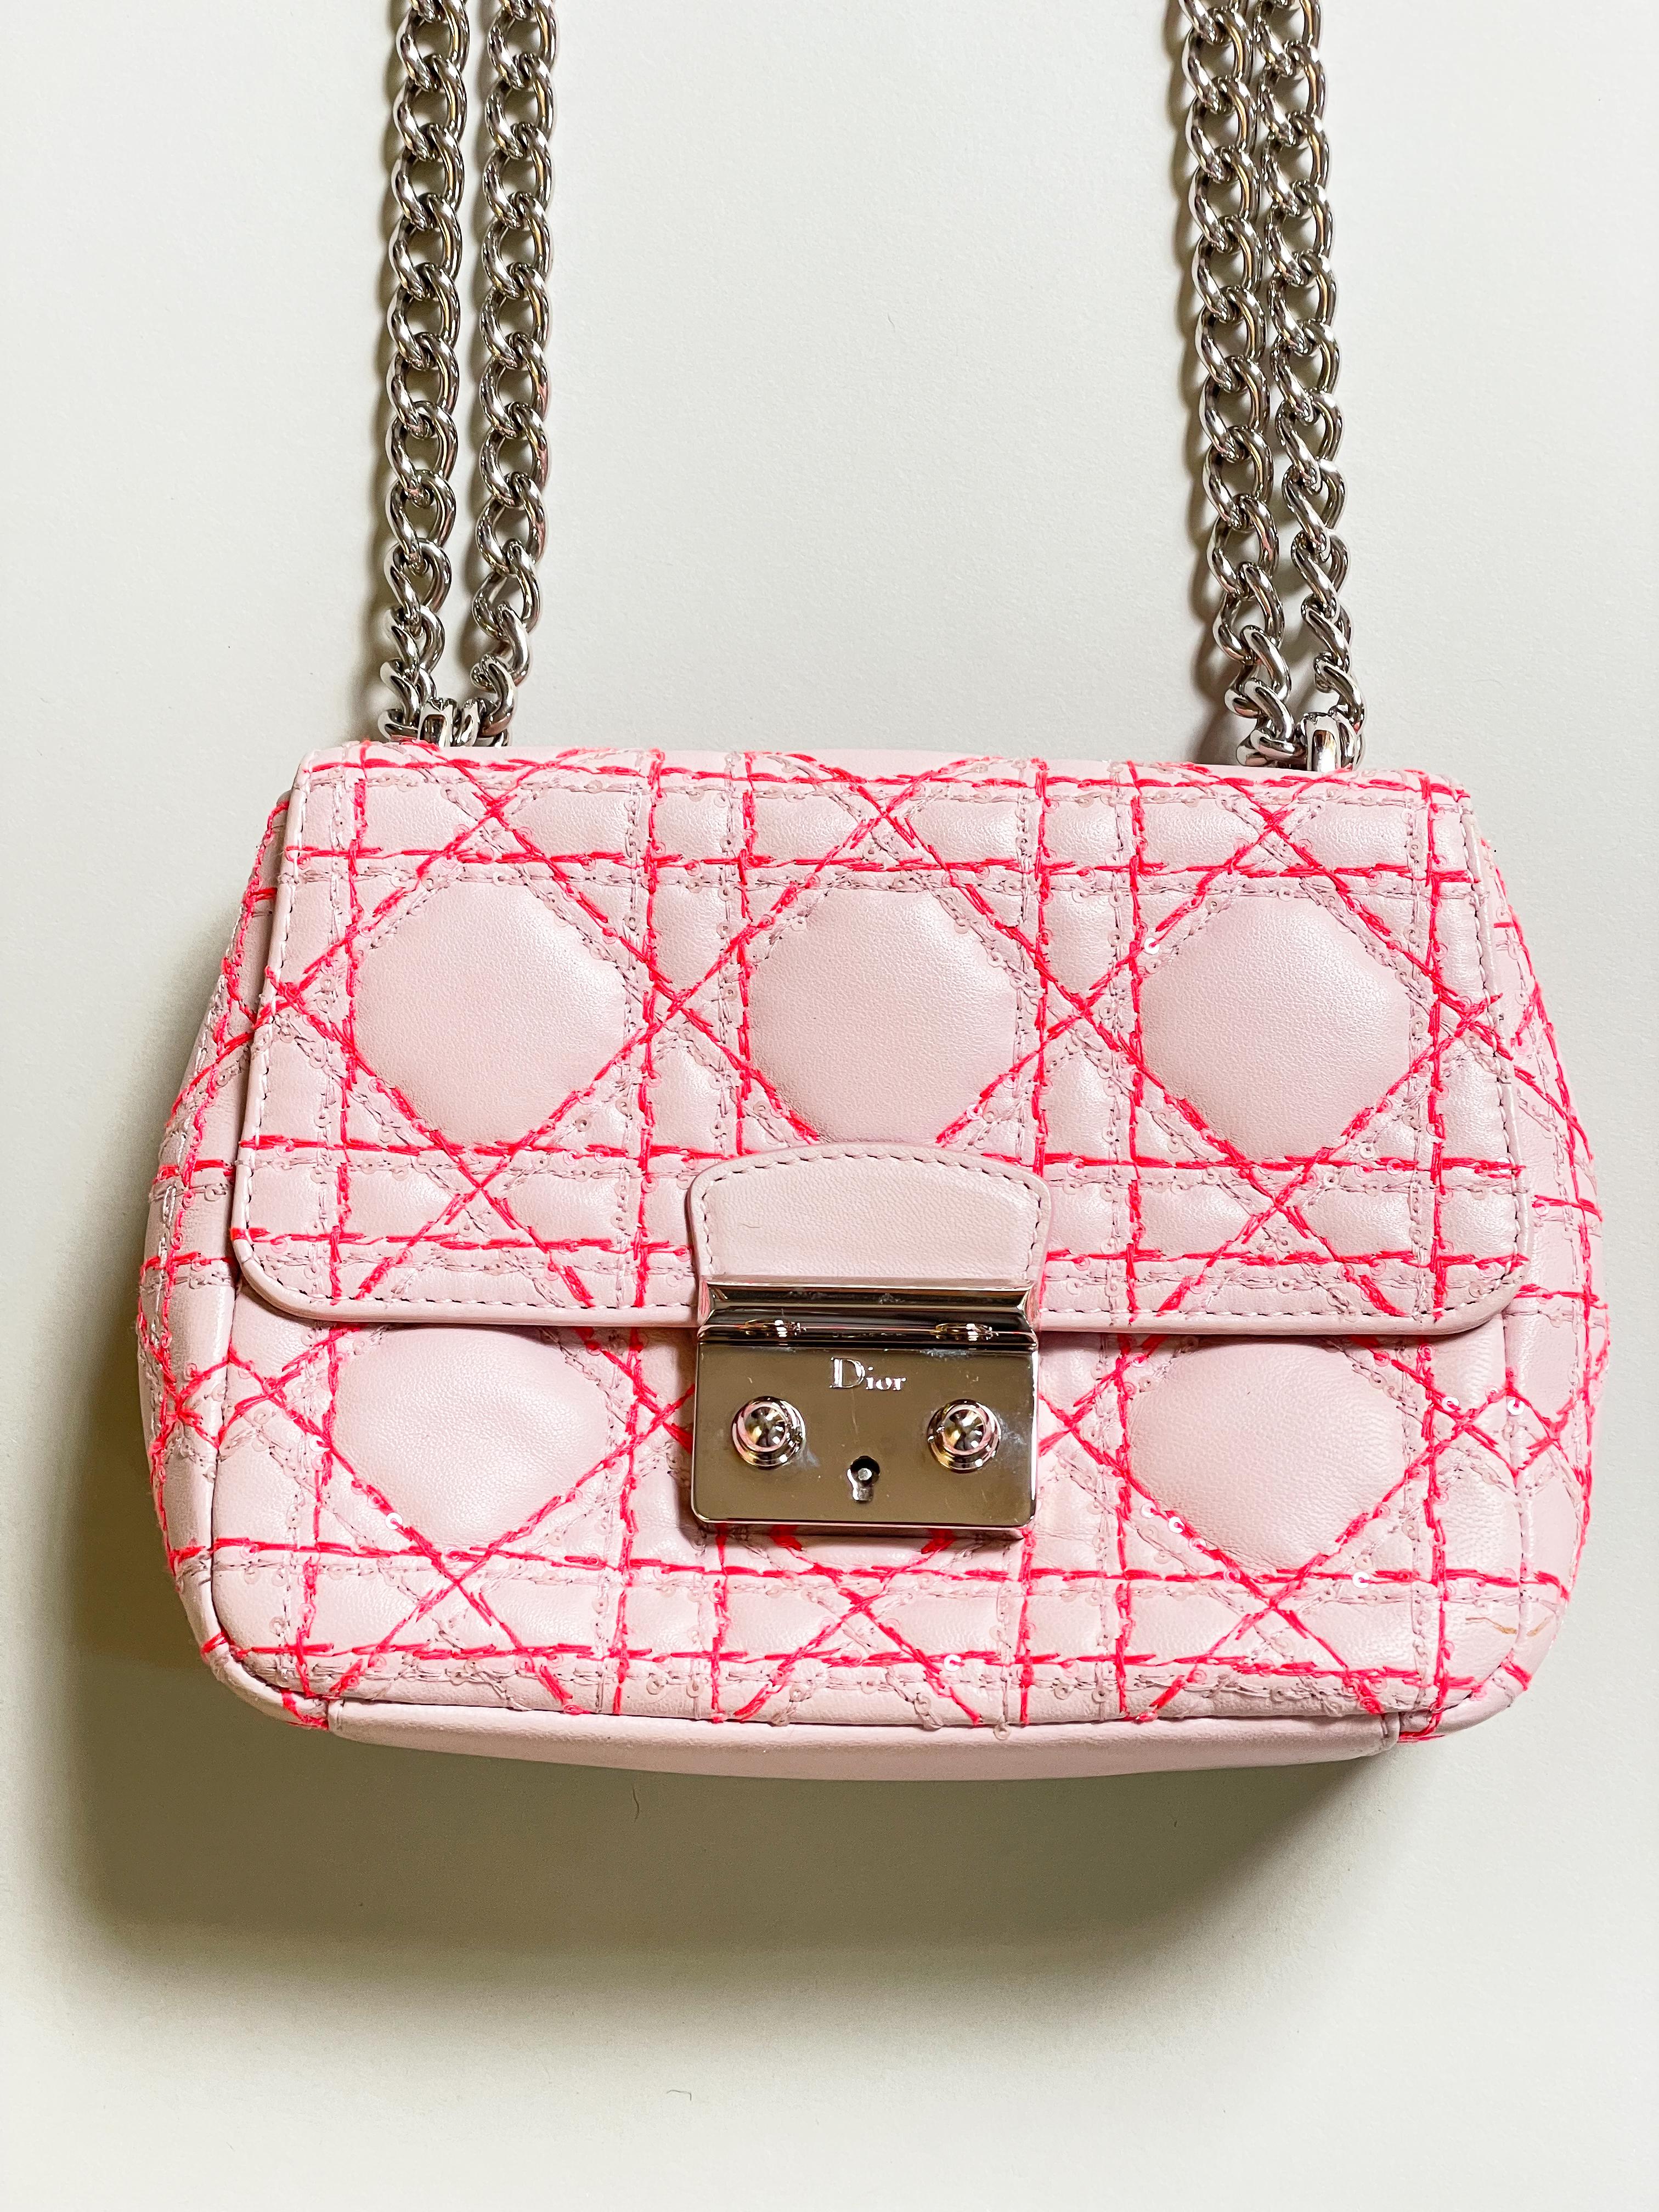 The perfect mini bag for an afternoon stroll. Almost perfect condition, sold with dust bag. A quilted pink fine leather embroidered with a few sequins. A shoulder bag but of course can be worn in hands. 

Year of manufacture: 2014